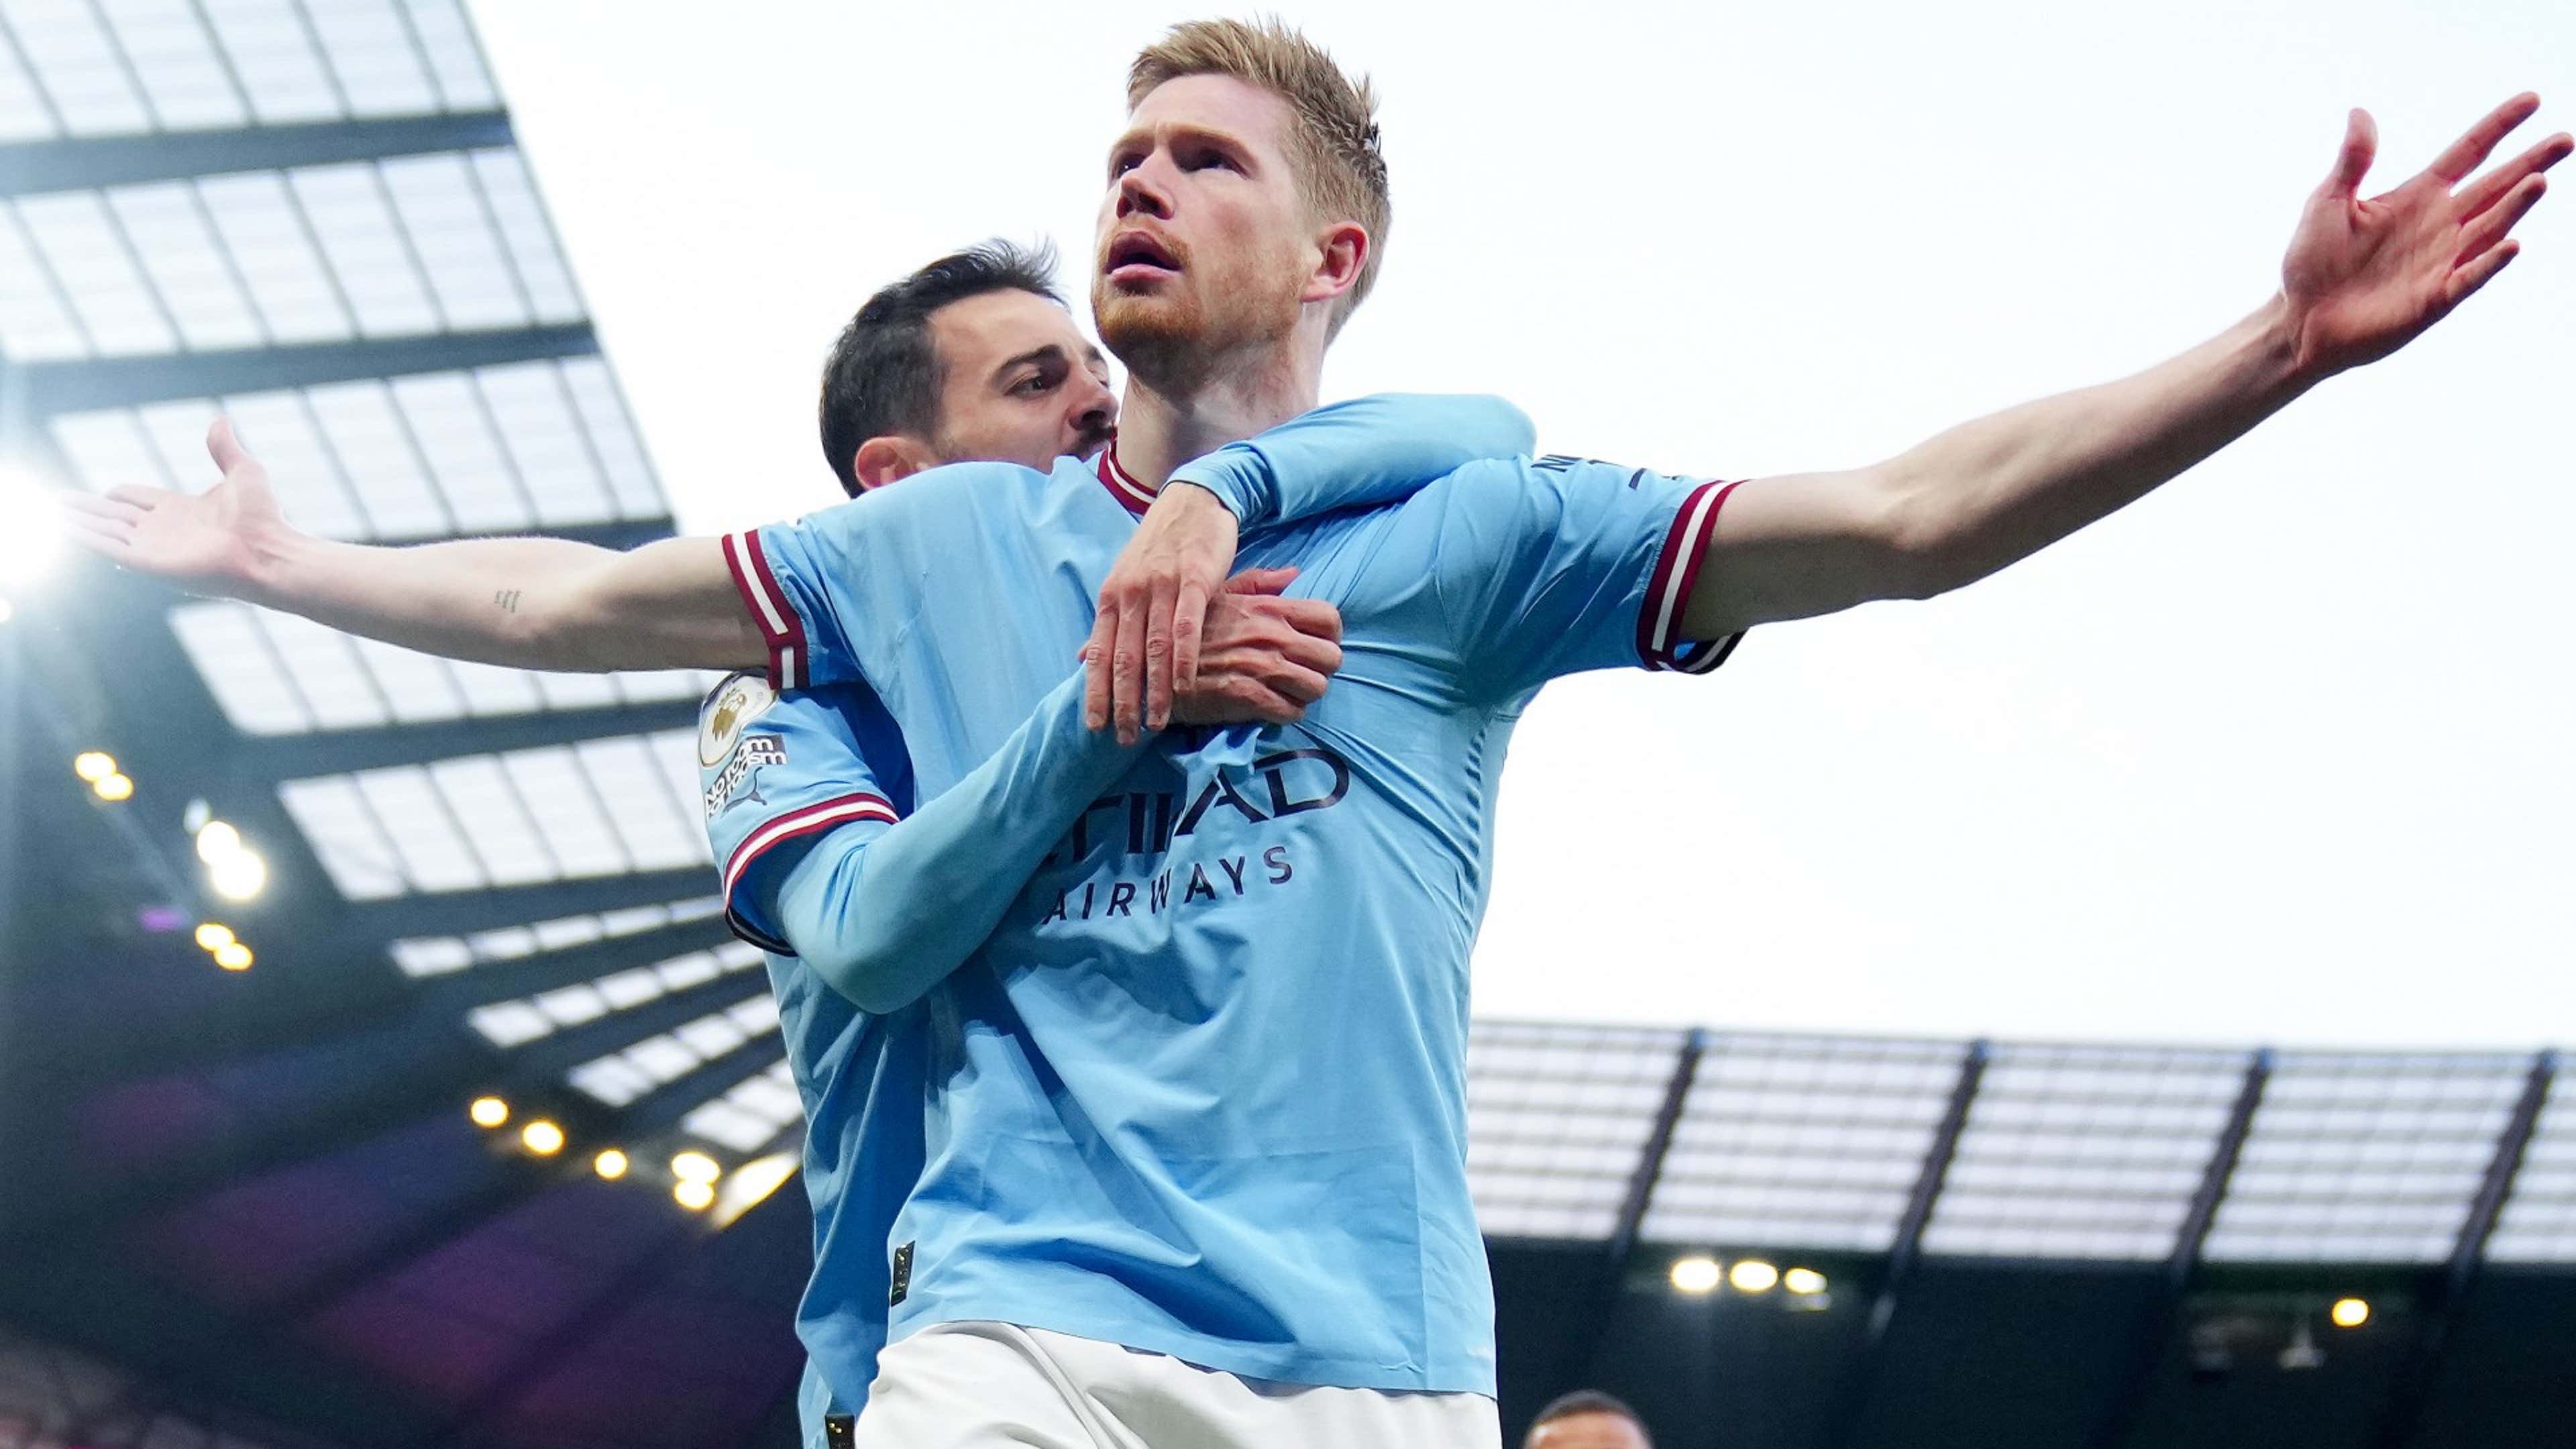 Its official: Kevin De Bruyne is the greatest midfielder the Premier League  has ever seen | Goal.com English Saudi Arabia